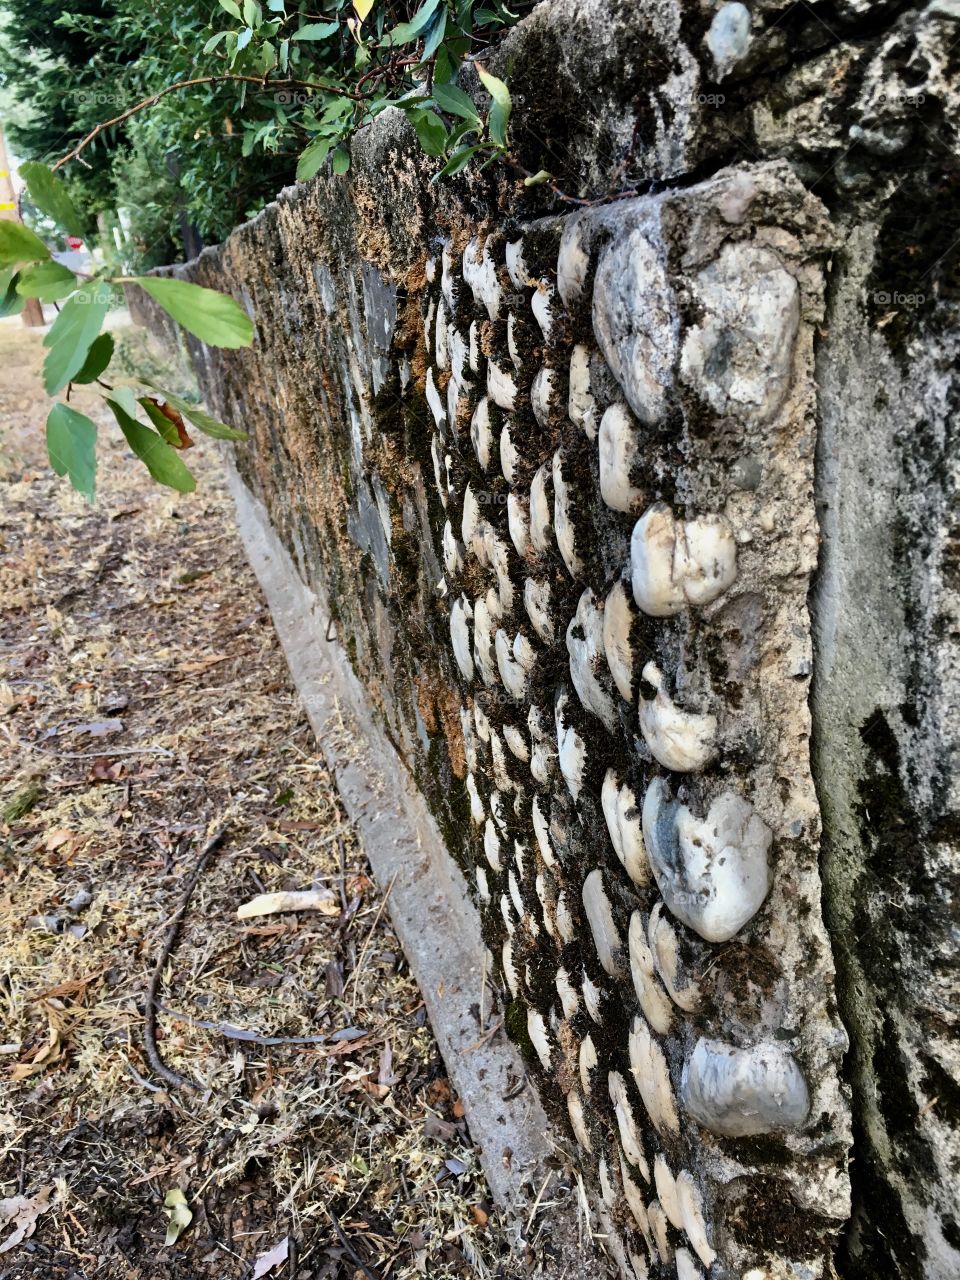 A textured rock wall aged with moss in a good prospective 